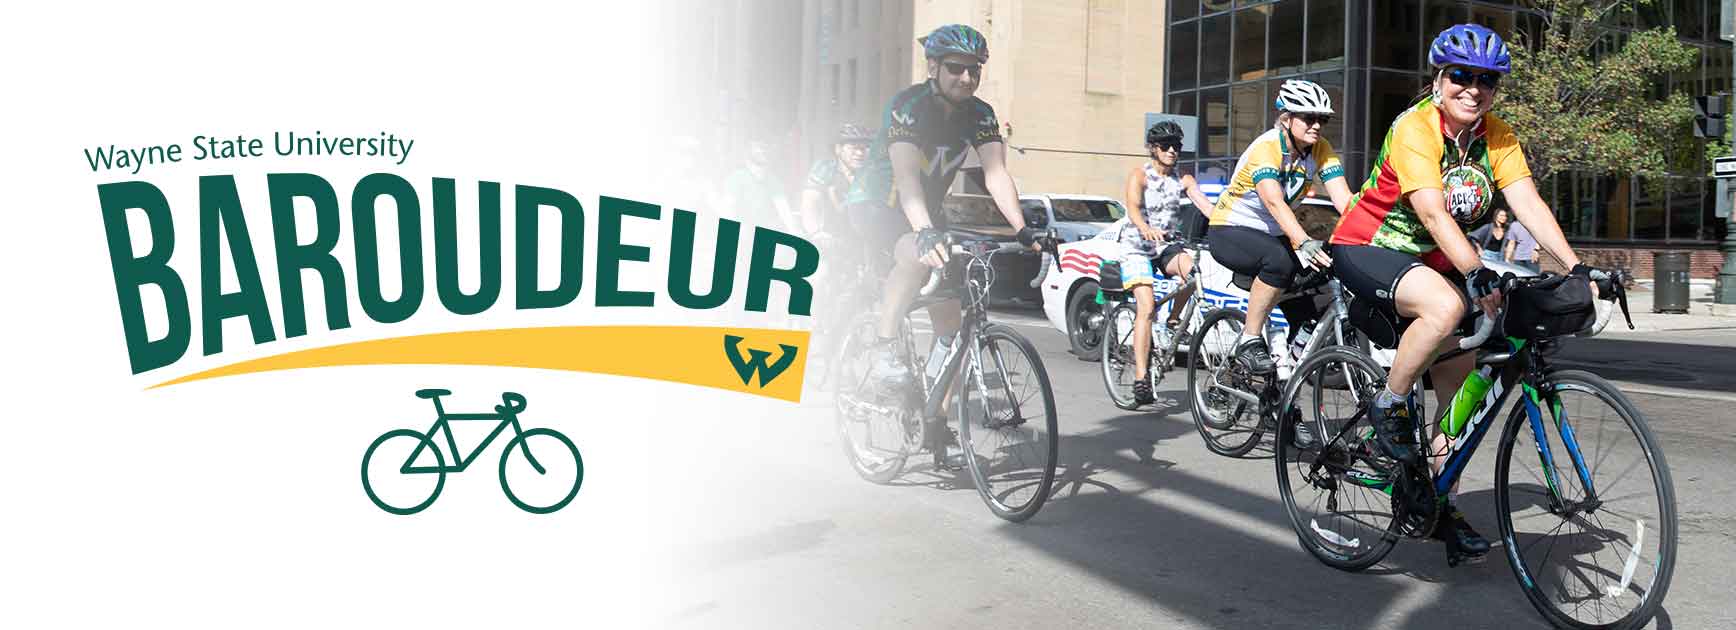 Photo of cyclists overlaid with the logo for the Baroudeur